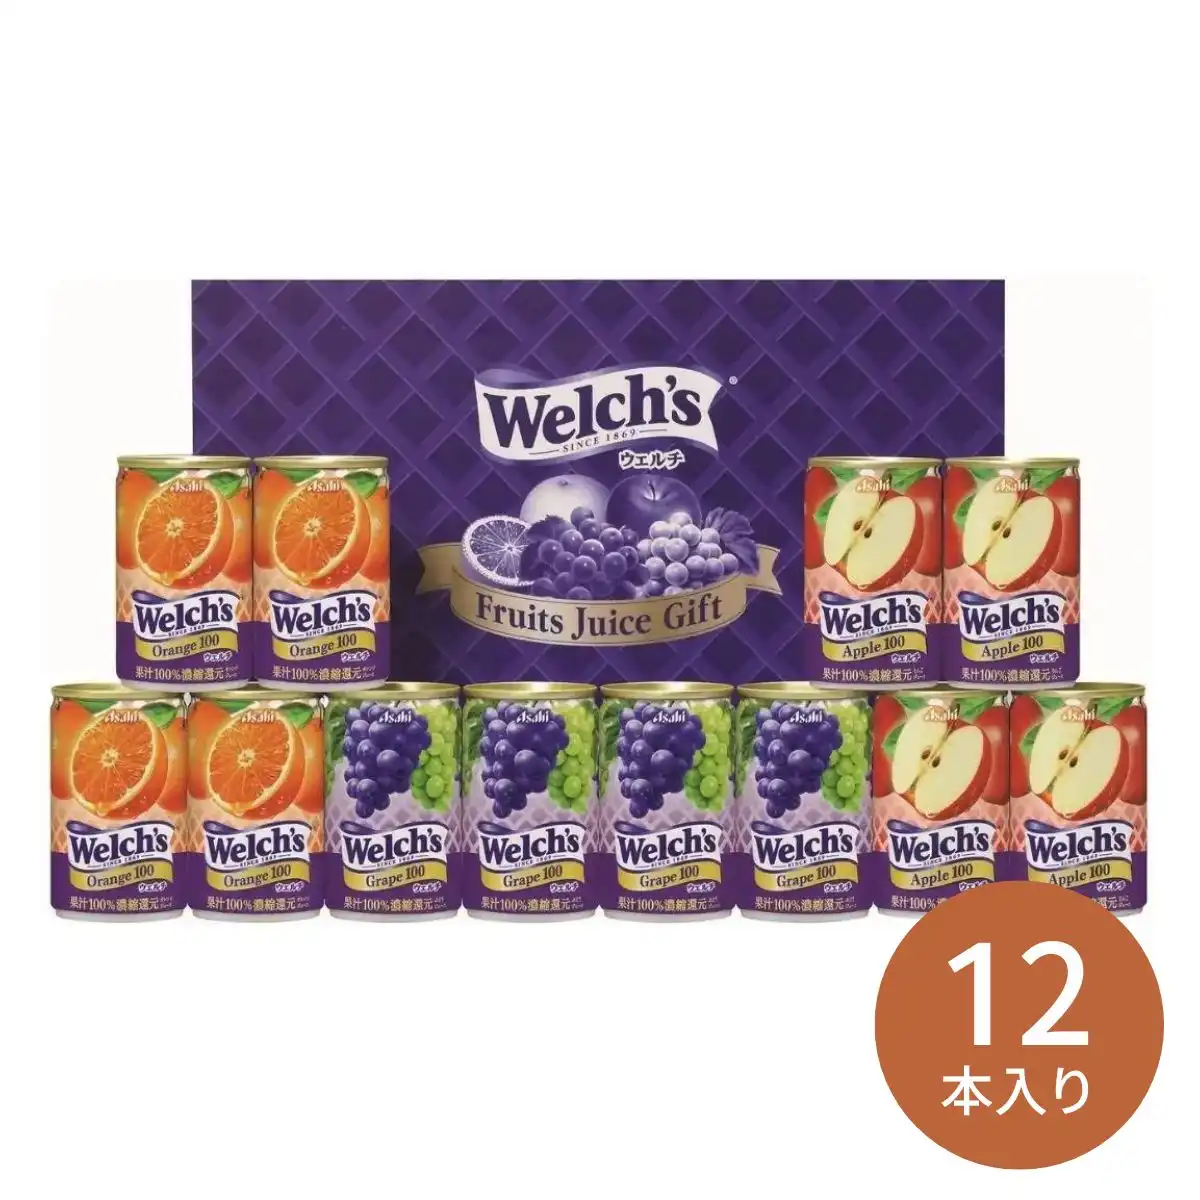 Welch’ｓ ウェルチ ギフト 12本入＜W15＞